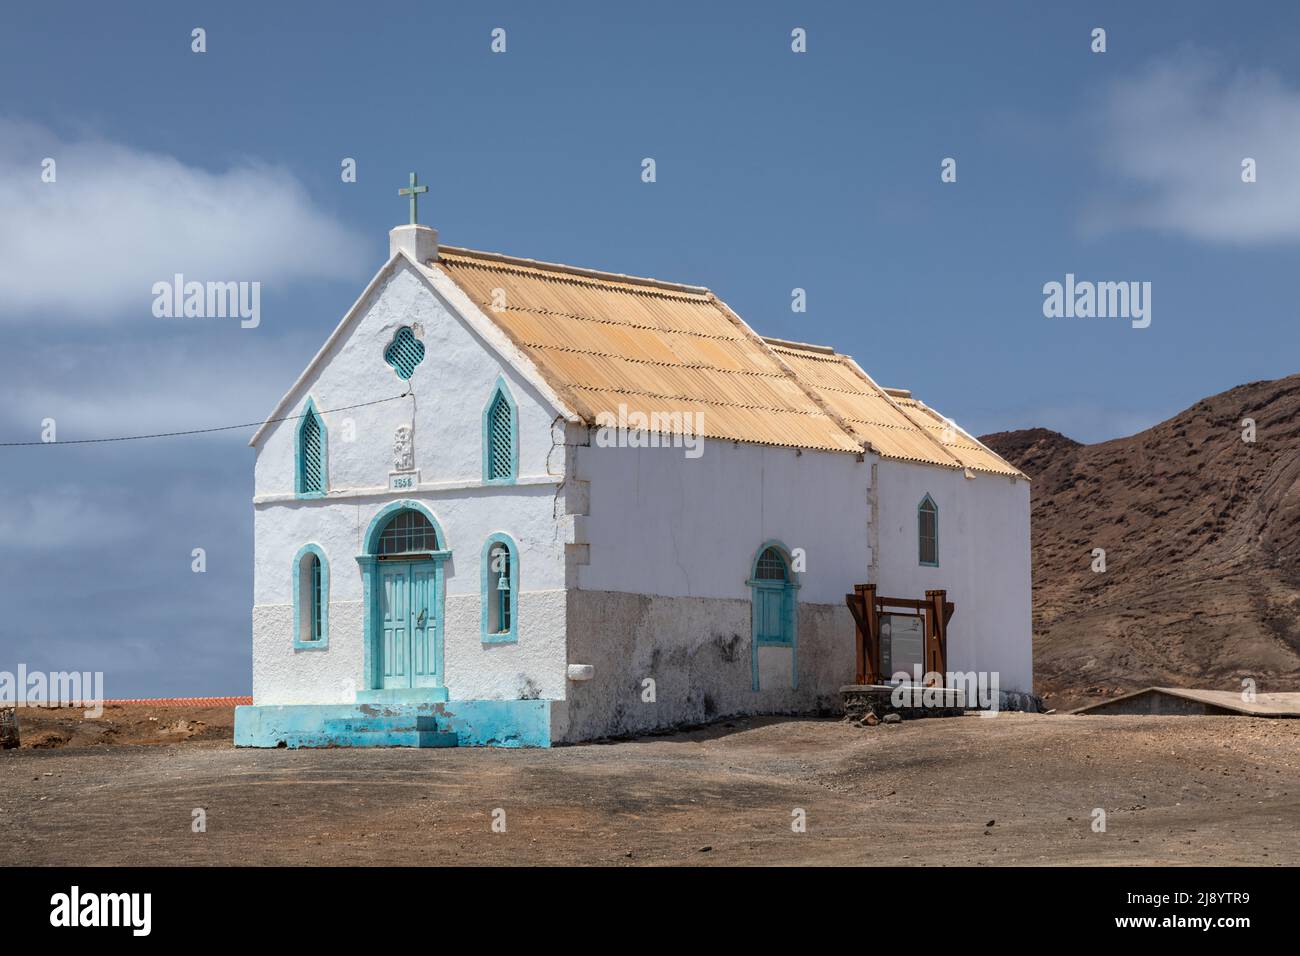 Picturesque white painted Lady Compassion Chapel in Pedra de Lume, Sal Island, Cape Verde, Cabo Verde Islands, Africa Stock Photo